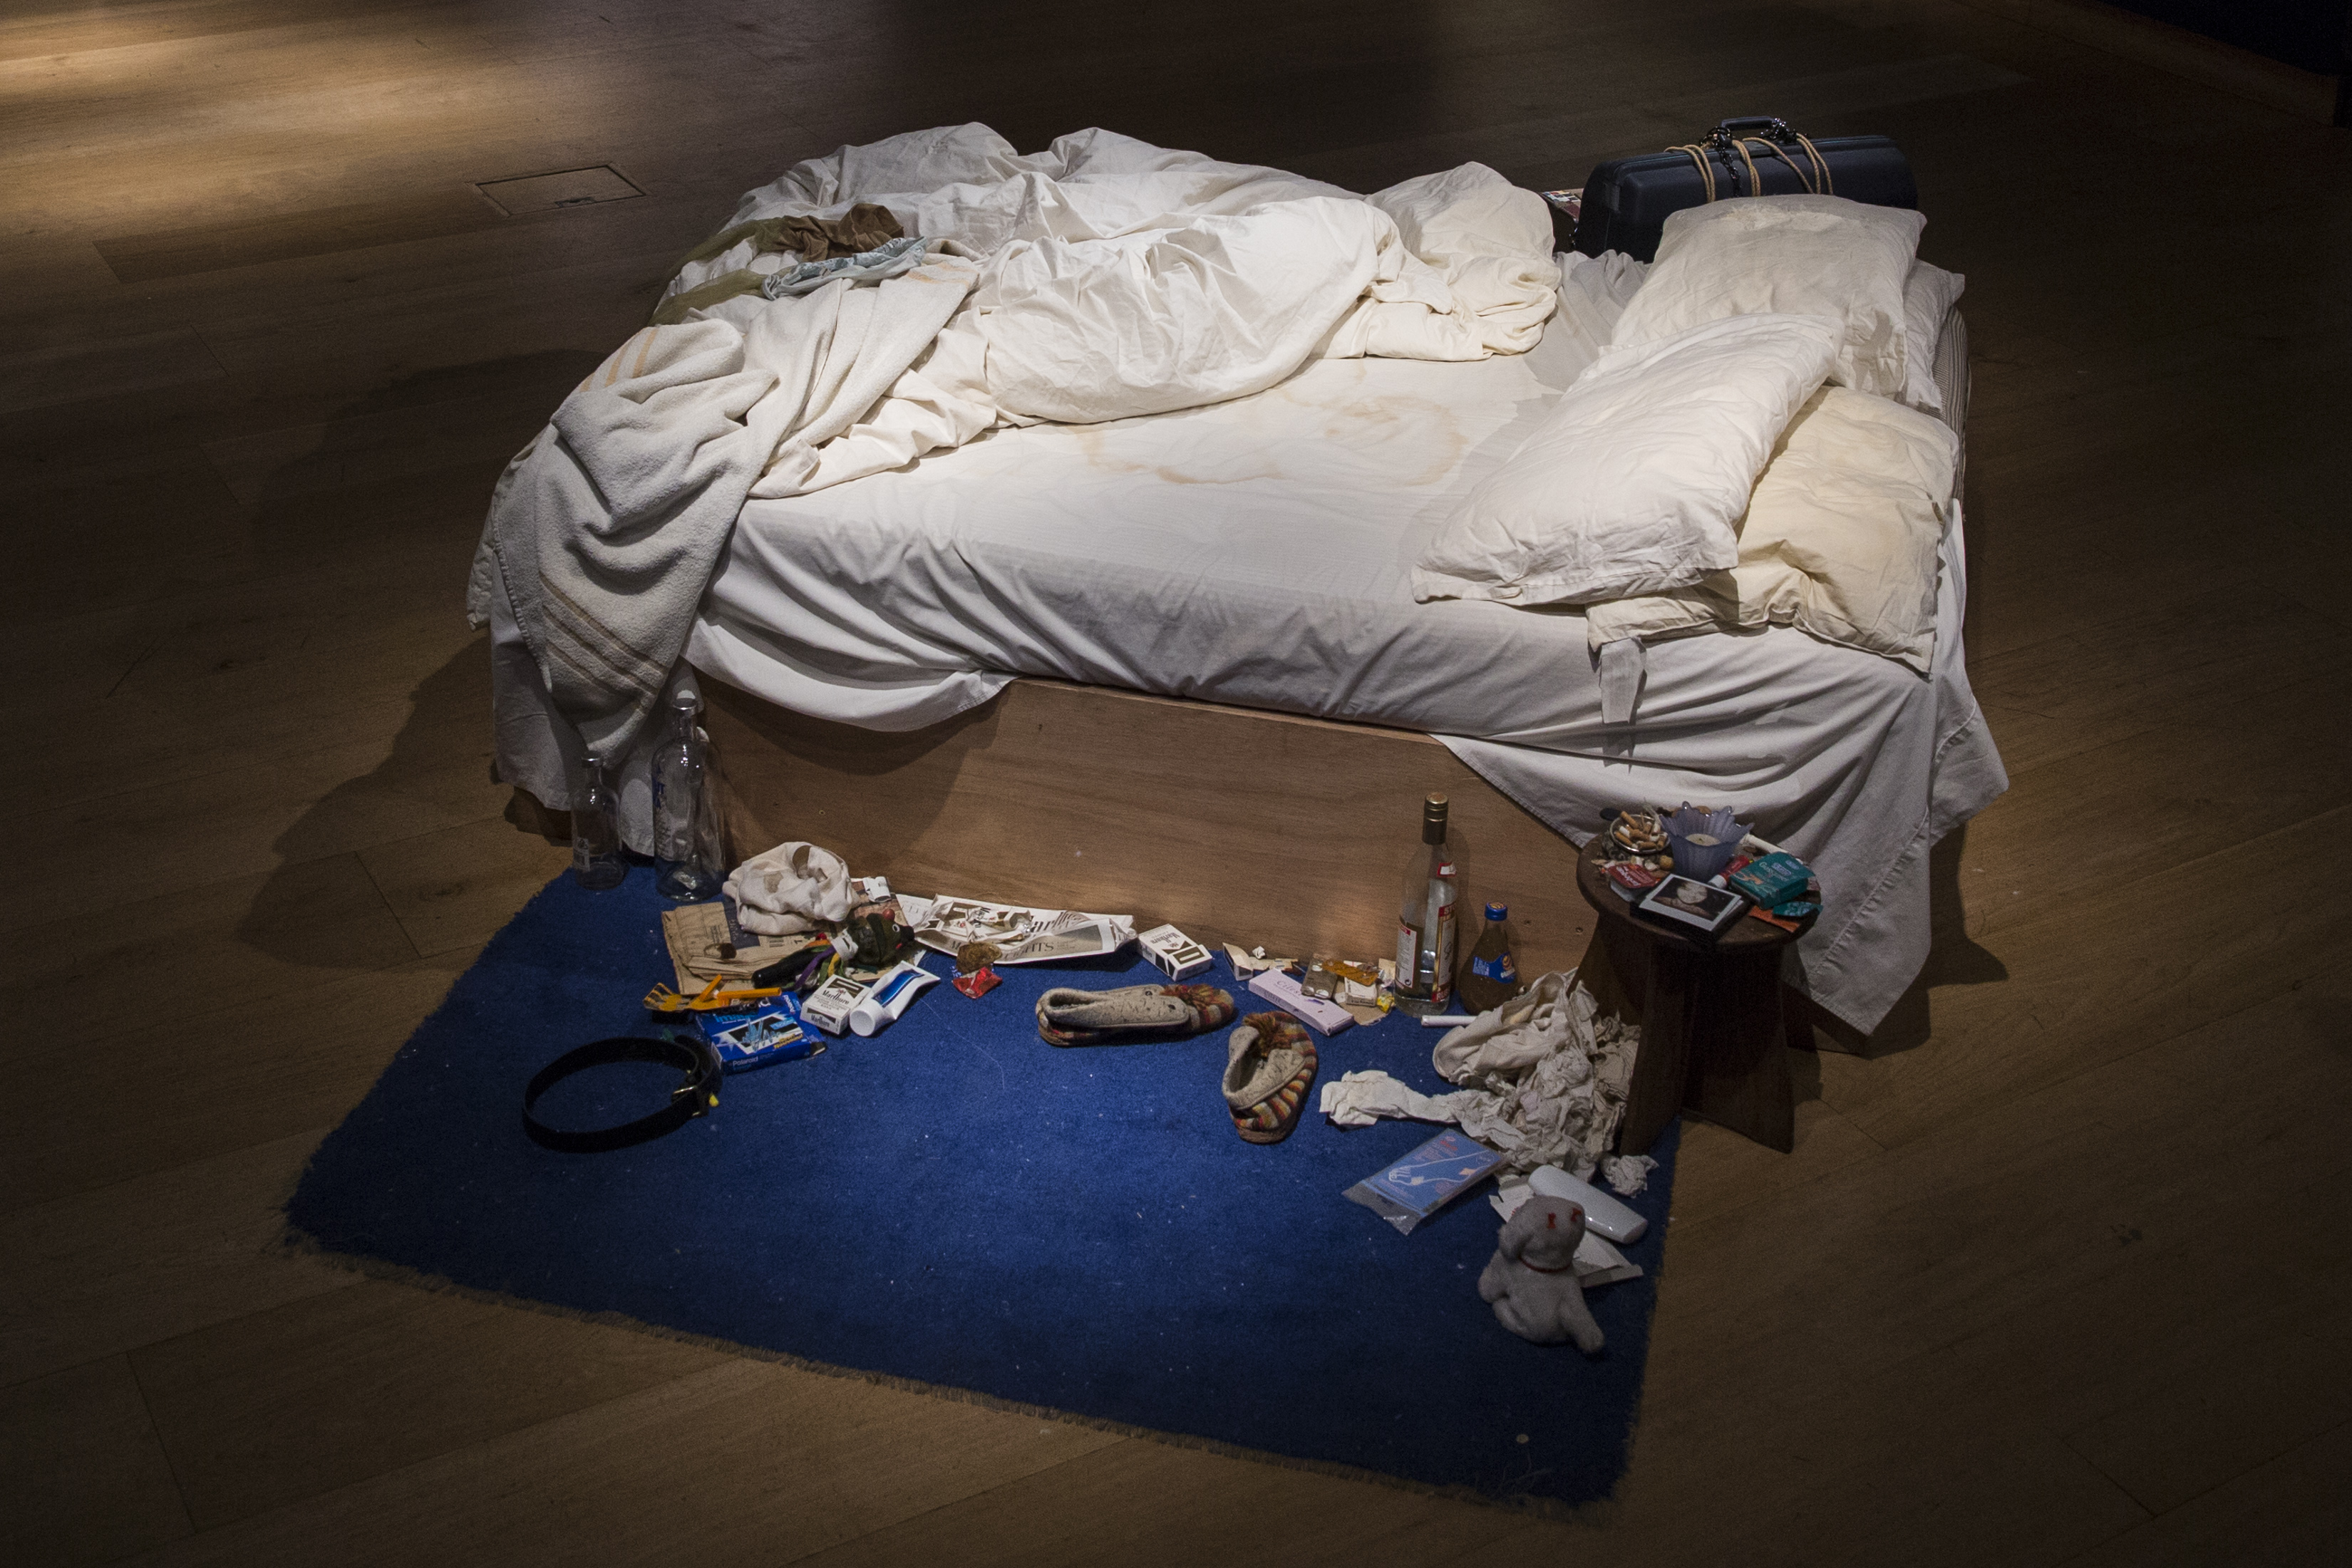 Tracey Emin's 'My Bed' To Be Auctioned At Christie's